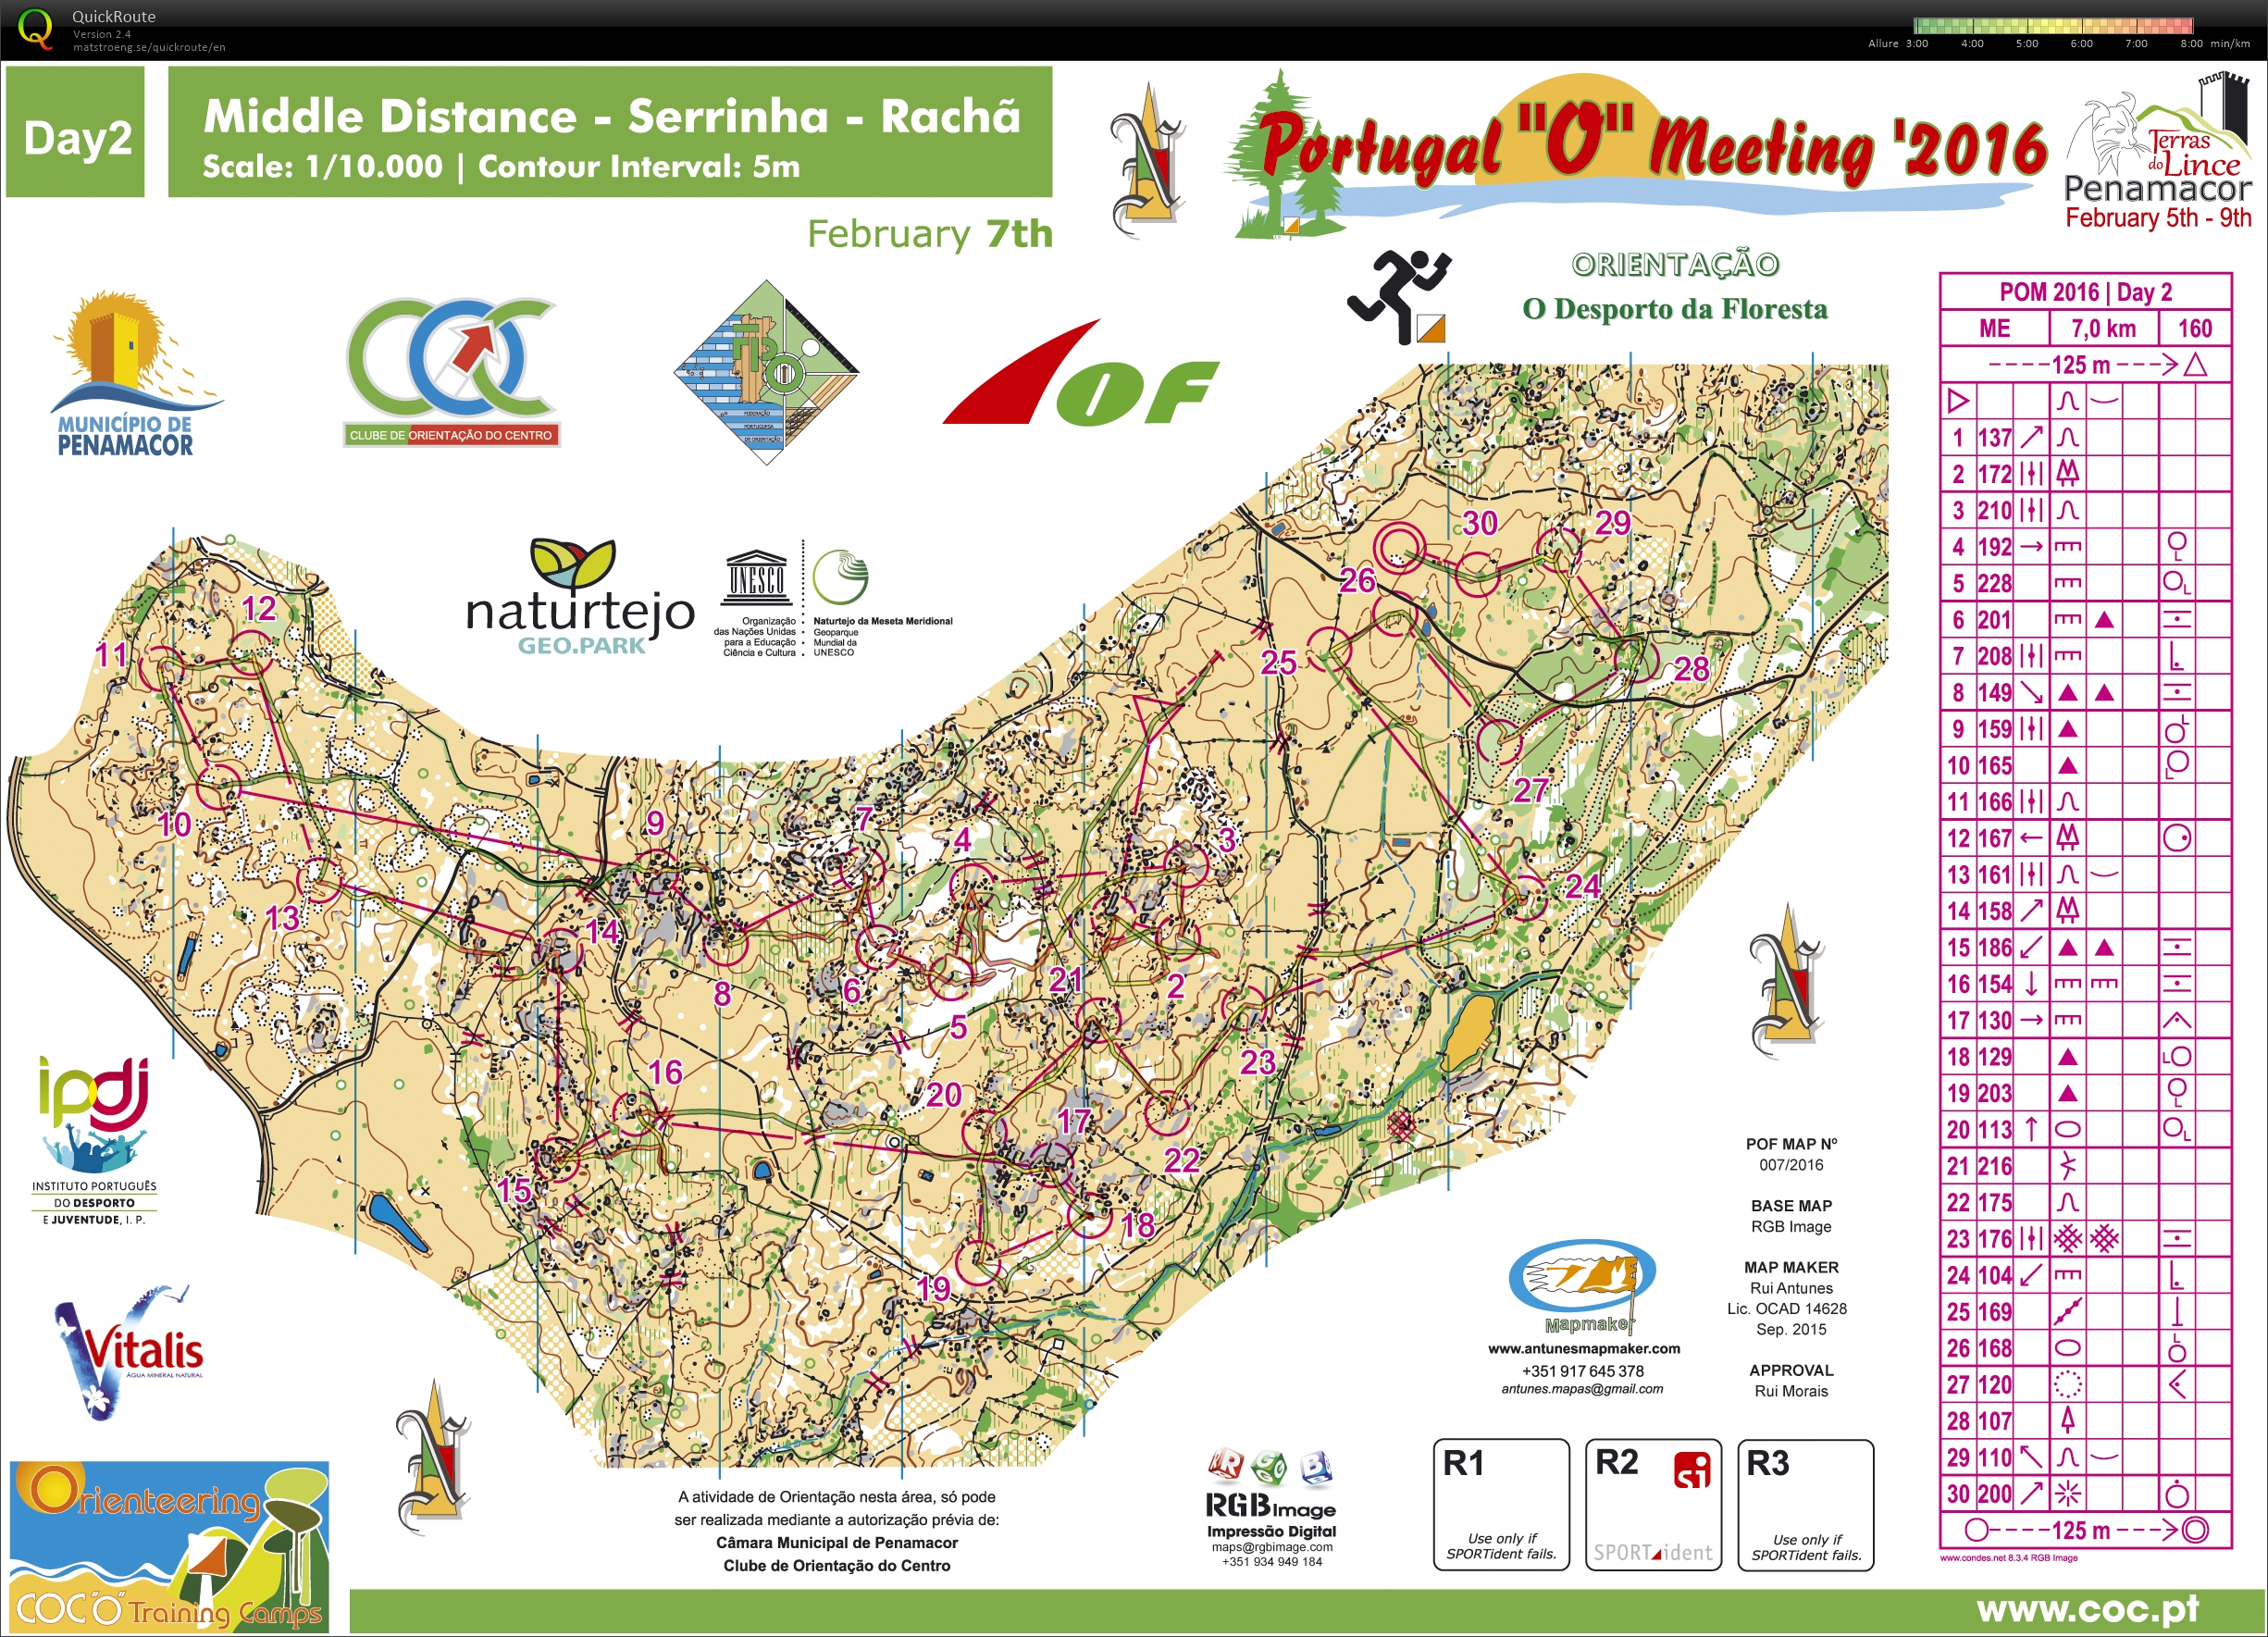 Portugal O Meeting Stage 2 (2016-02-07)